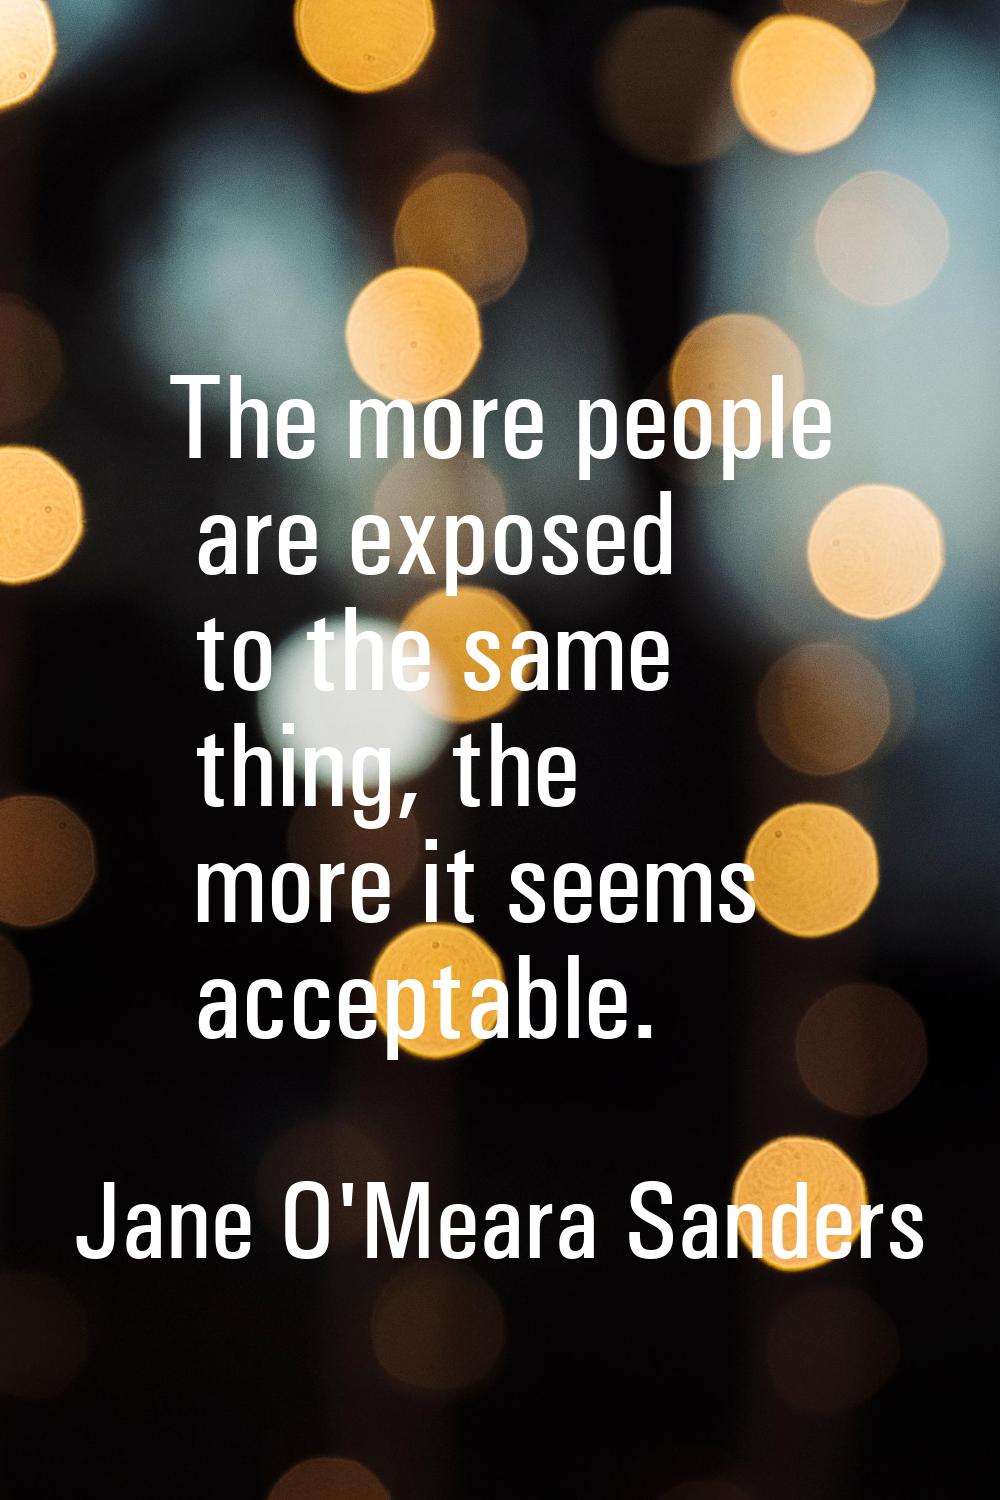 The more people are exposed to the same thing, the more it seems acceptable.